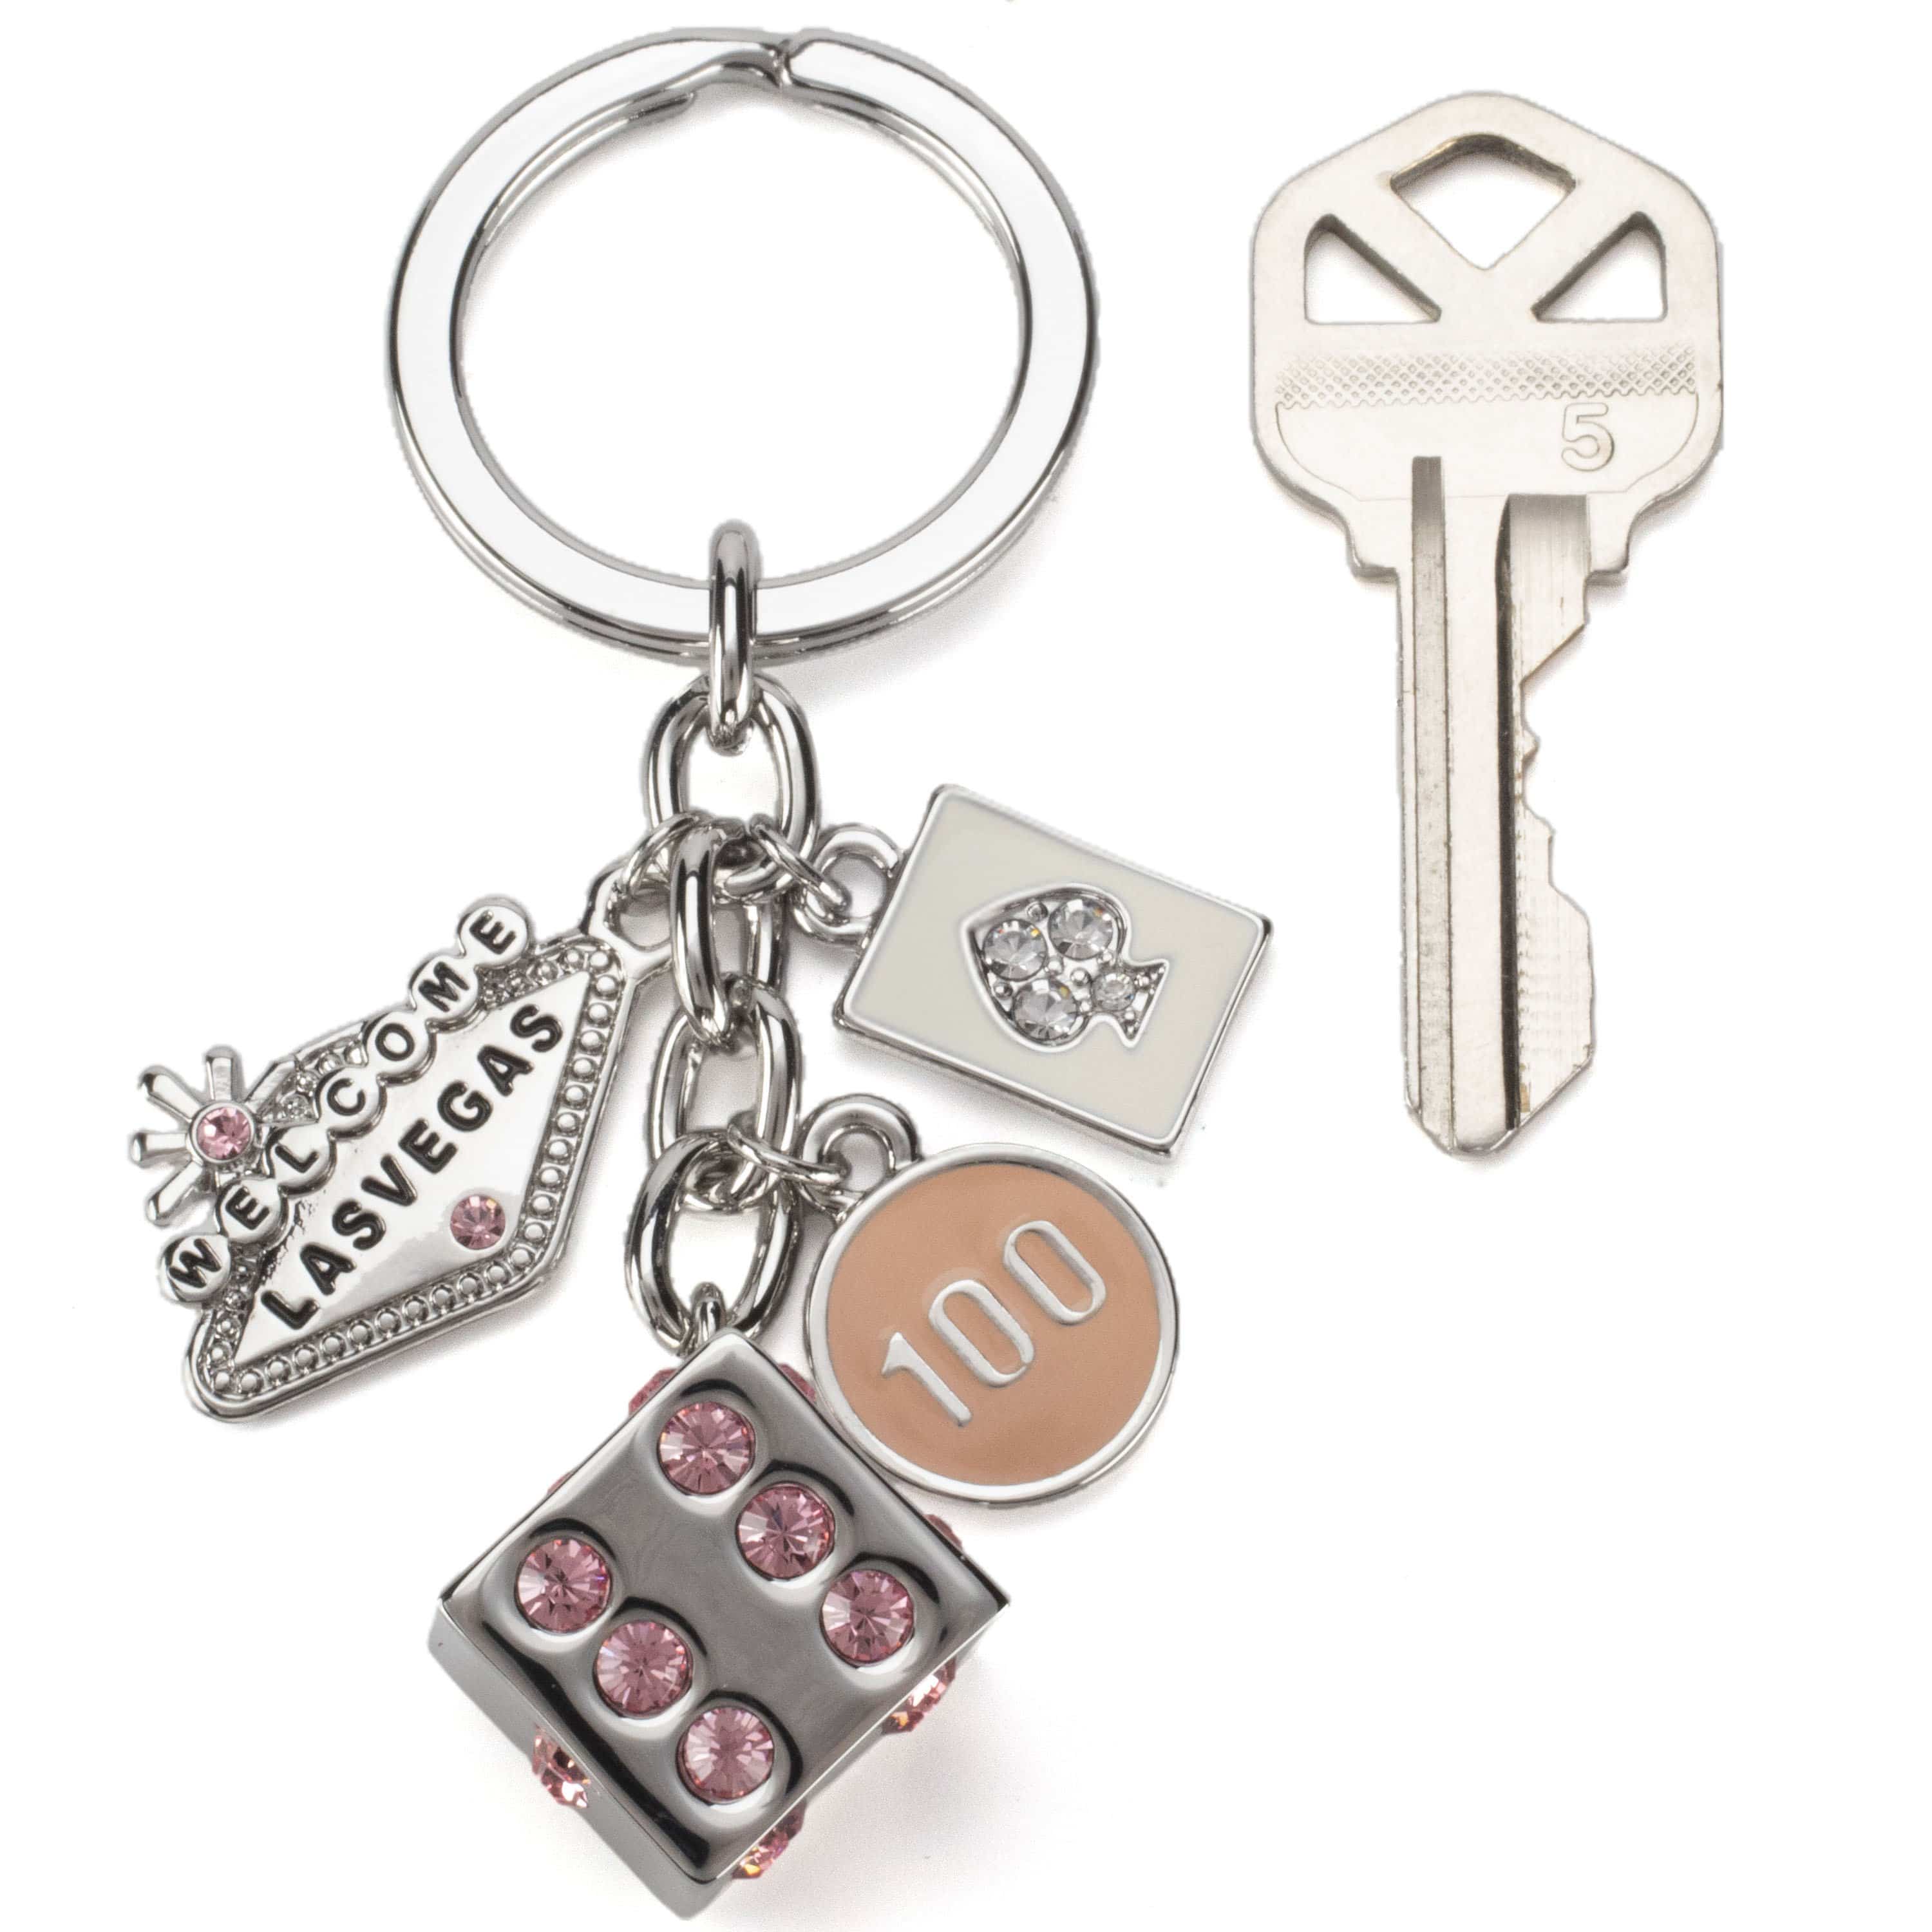 Kalifano Crystal Keychains Las Vegas Welcome Sign Dice Pink Keychain made with Swarovski Crystals SKC-188